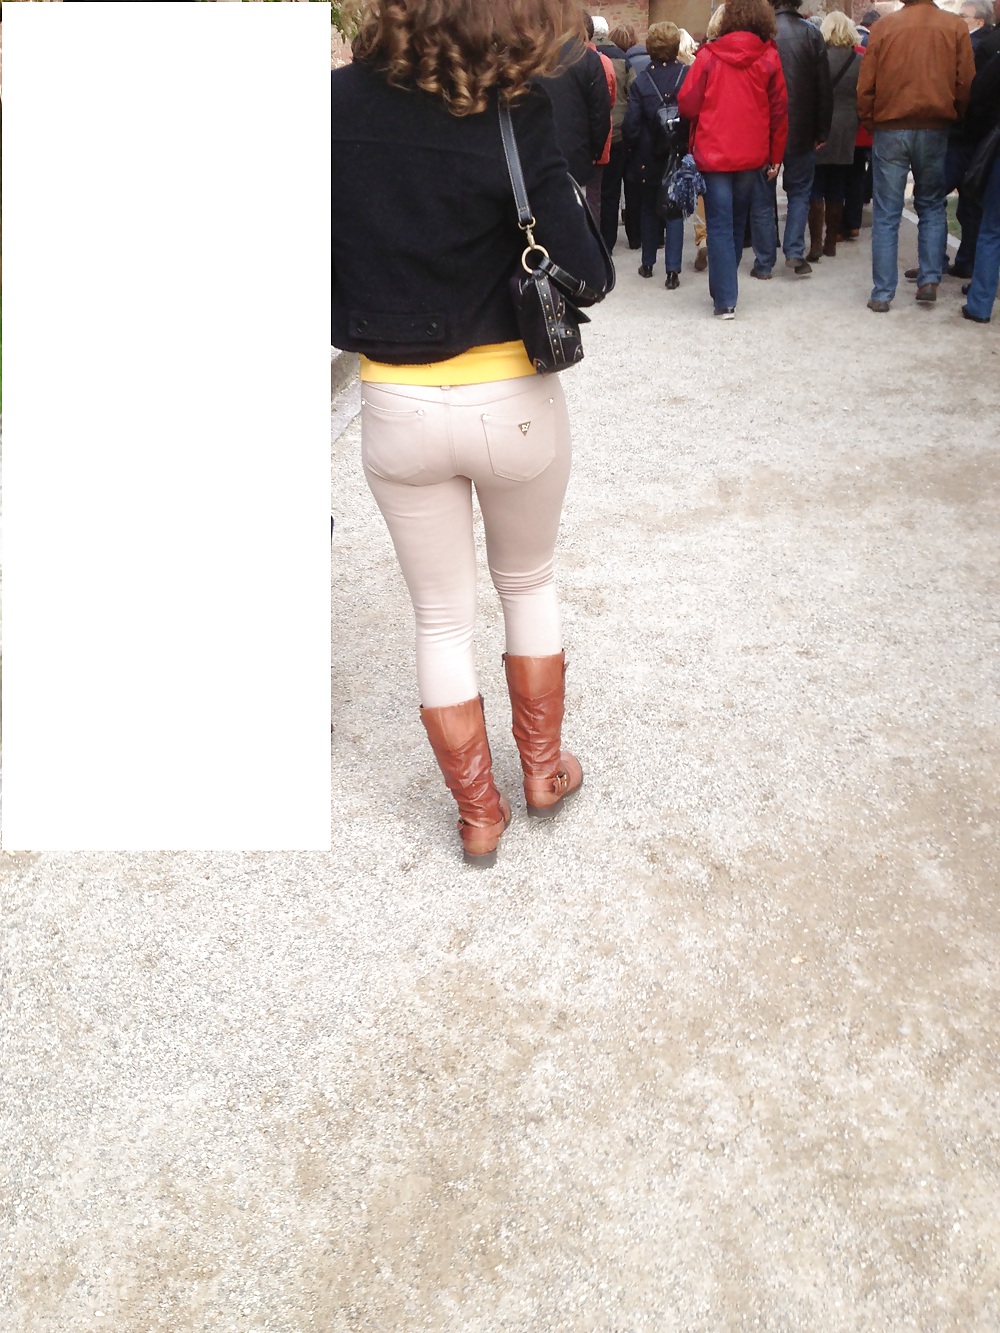 Candid Ass in tight Jeans and Boots - Voyeur #12048475